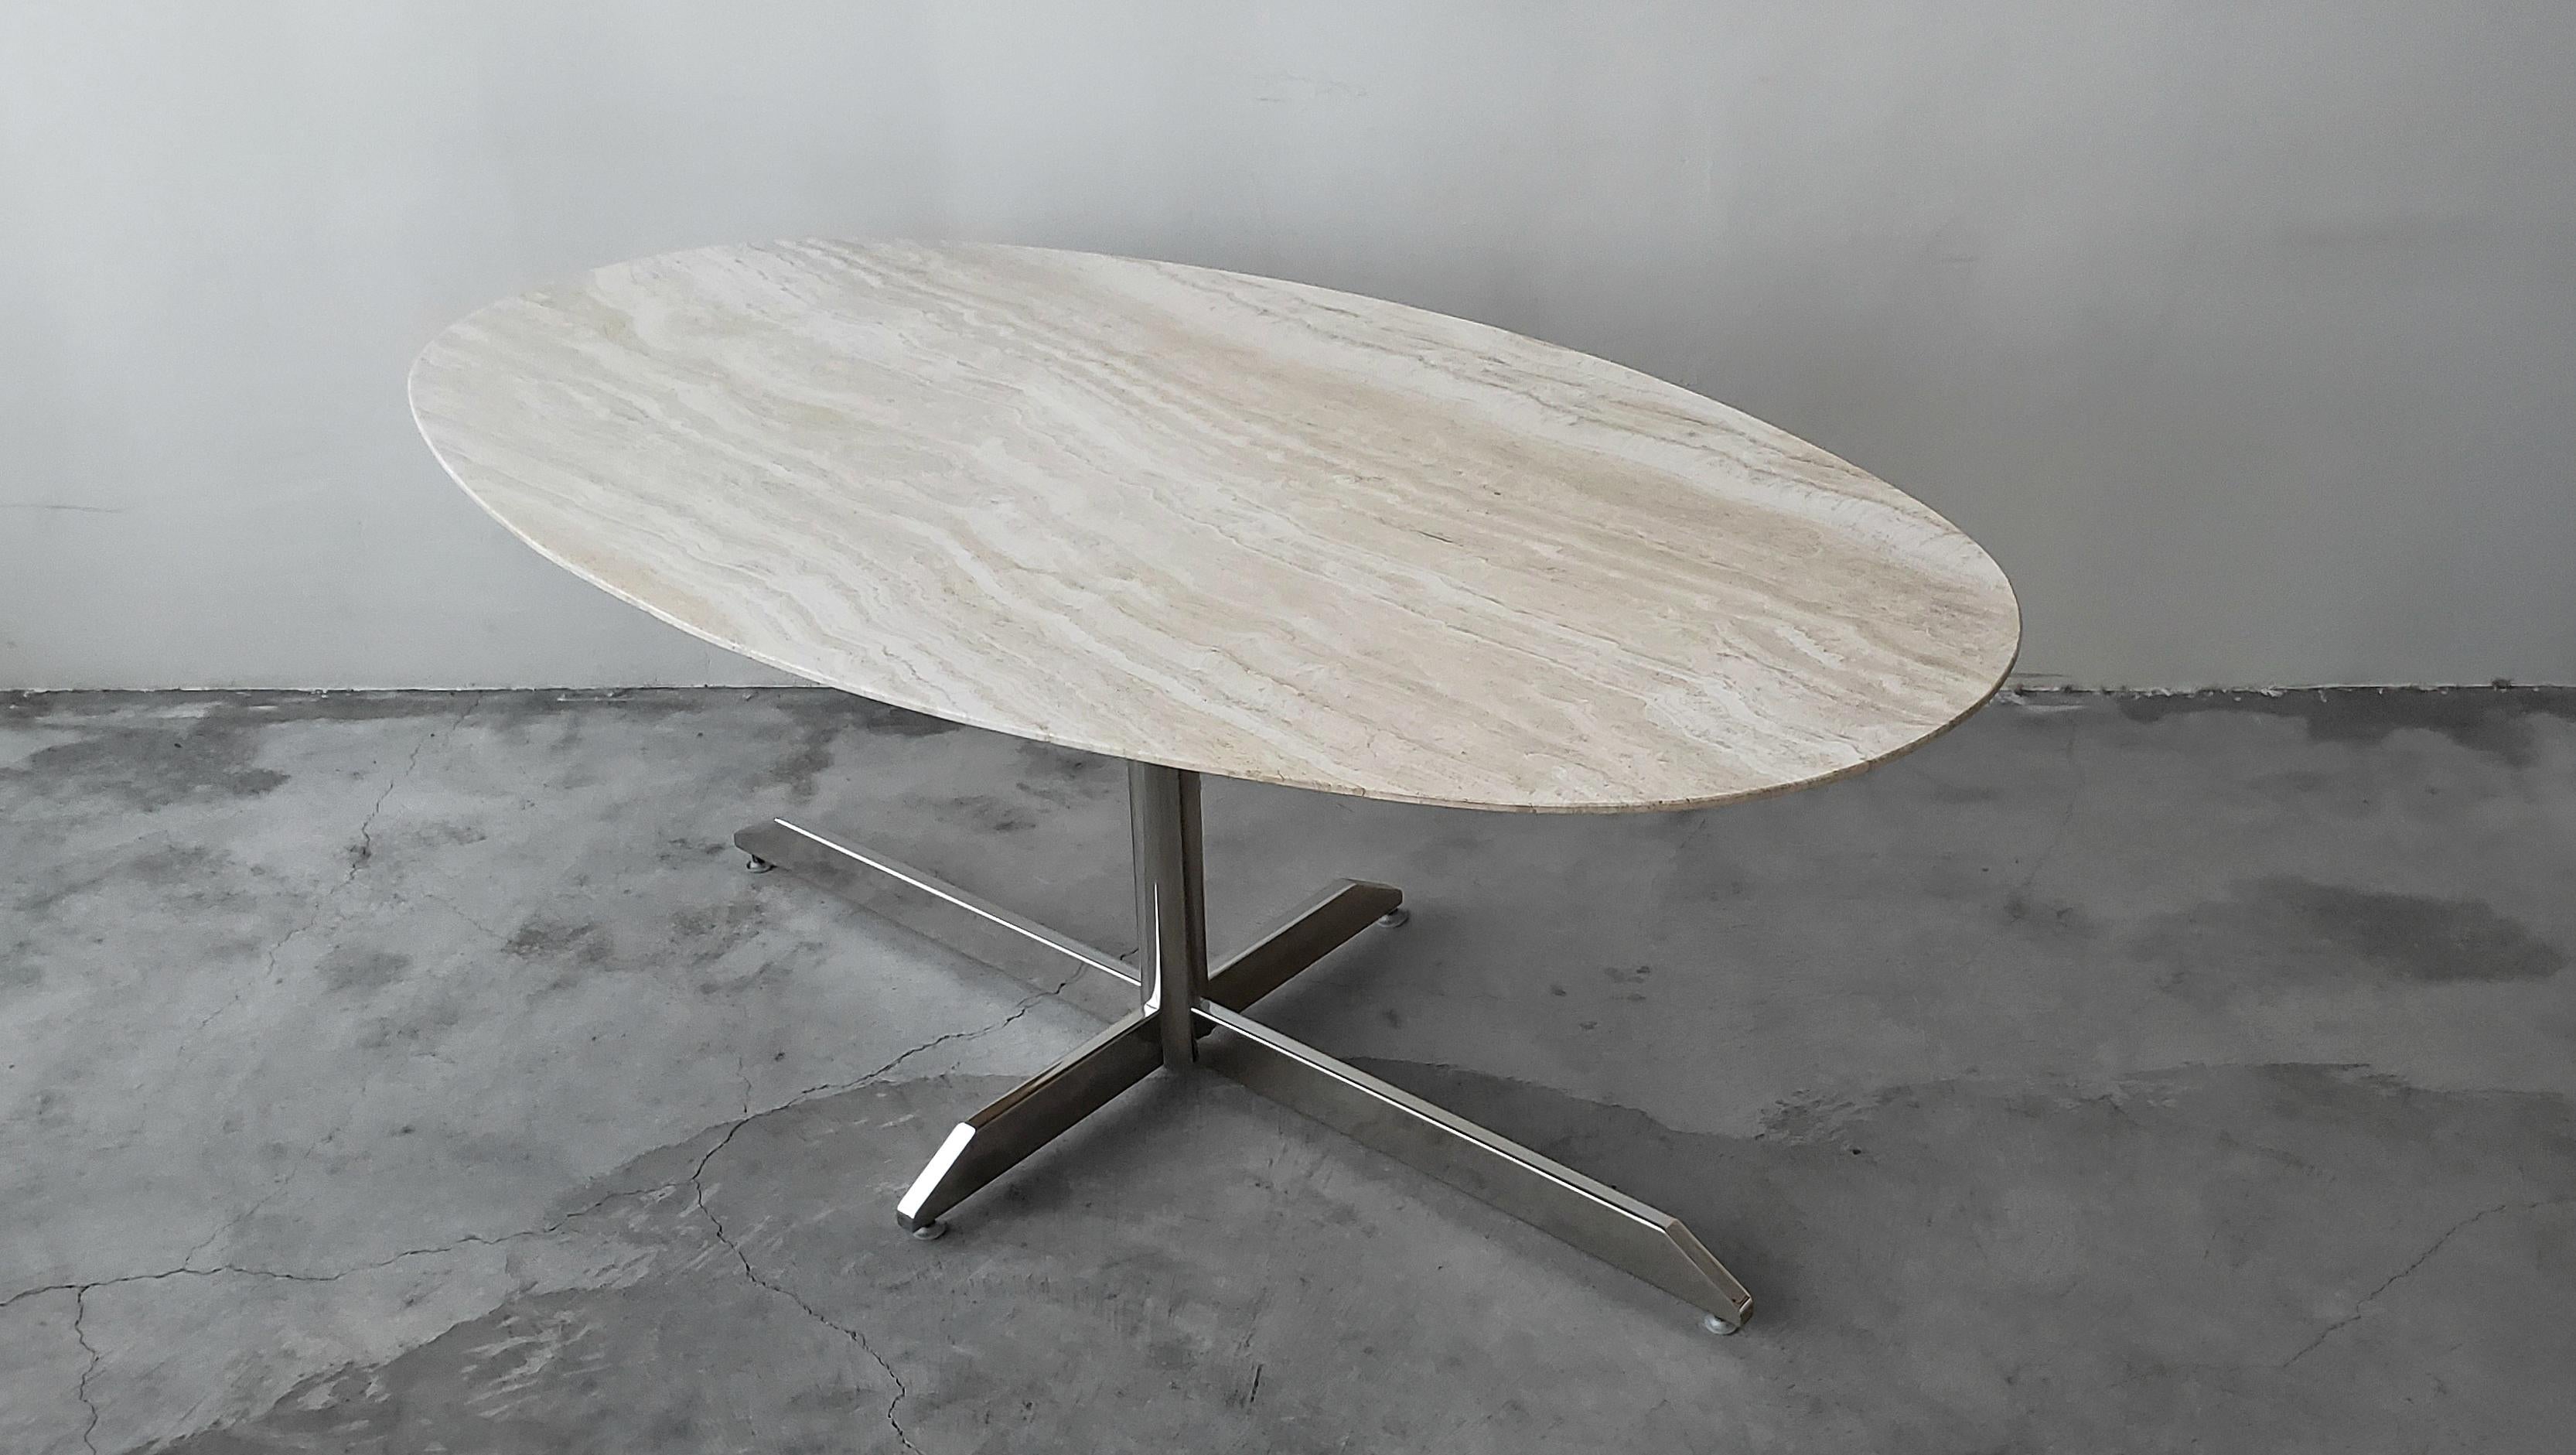 Absolutely beautiful oval travertine and chrome dining table by Florence Knoll for Roche Bobois. Nothing short of amazing. This table screams designer simplicity. Such a versatile table that could be paired with almost any chairs in any decor